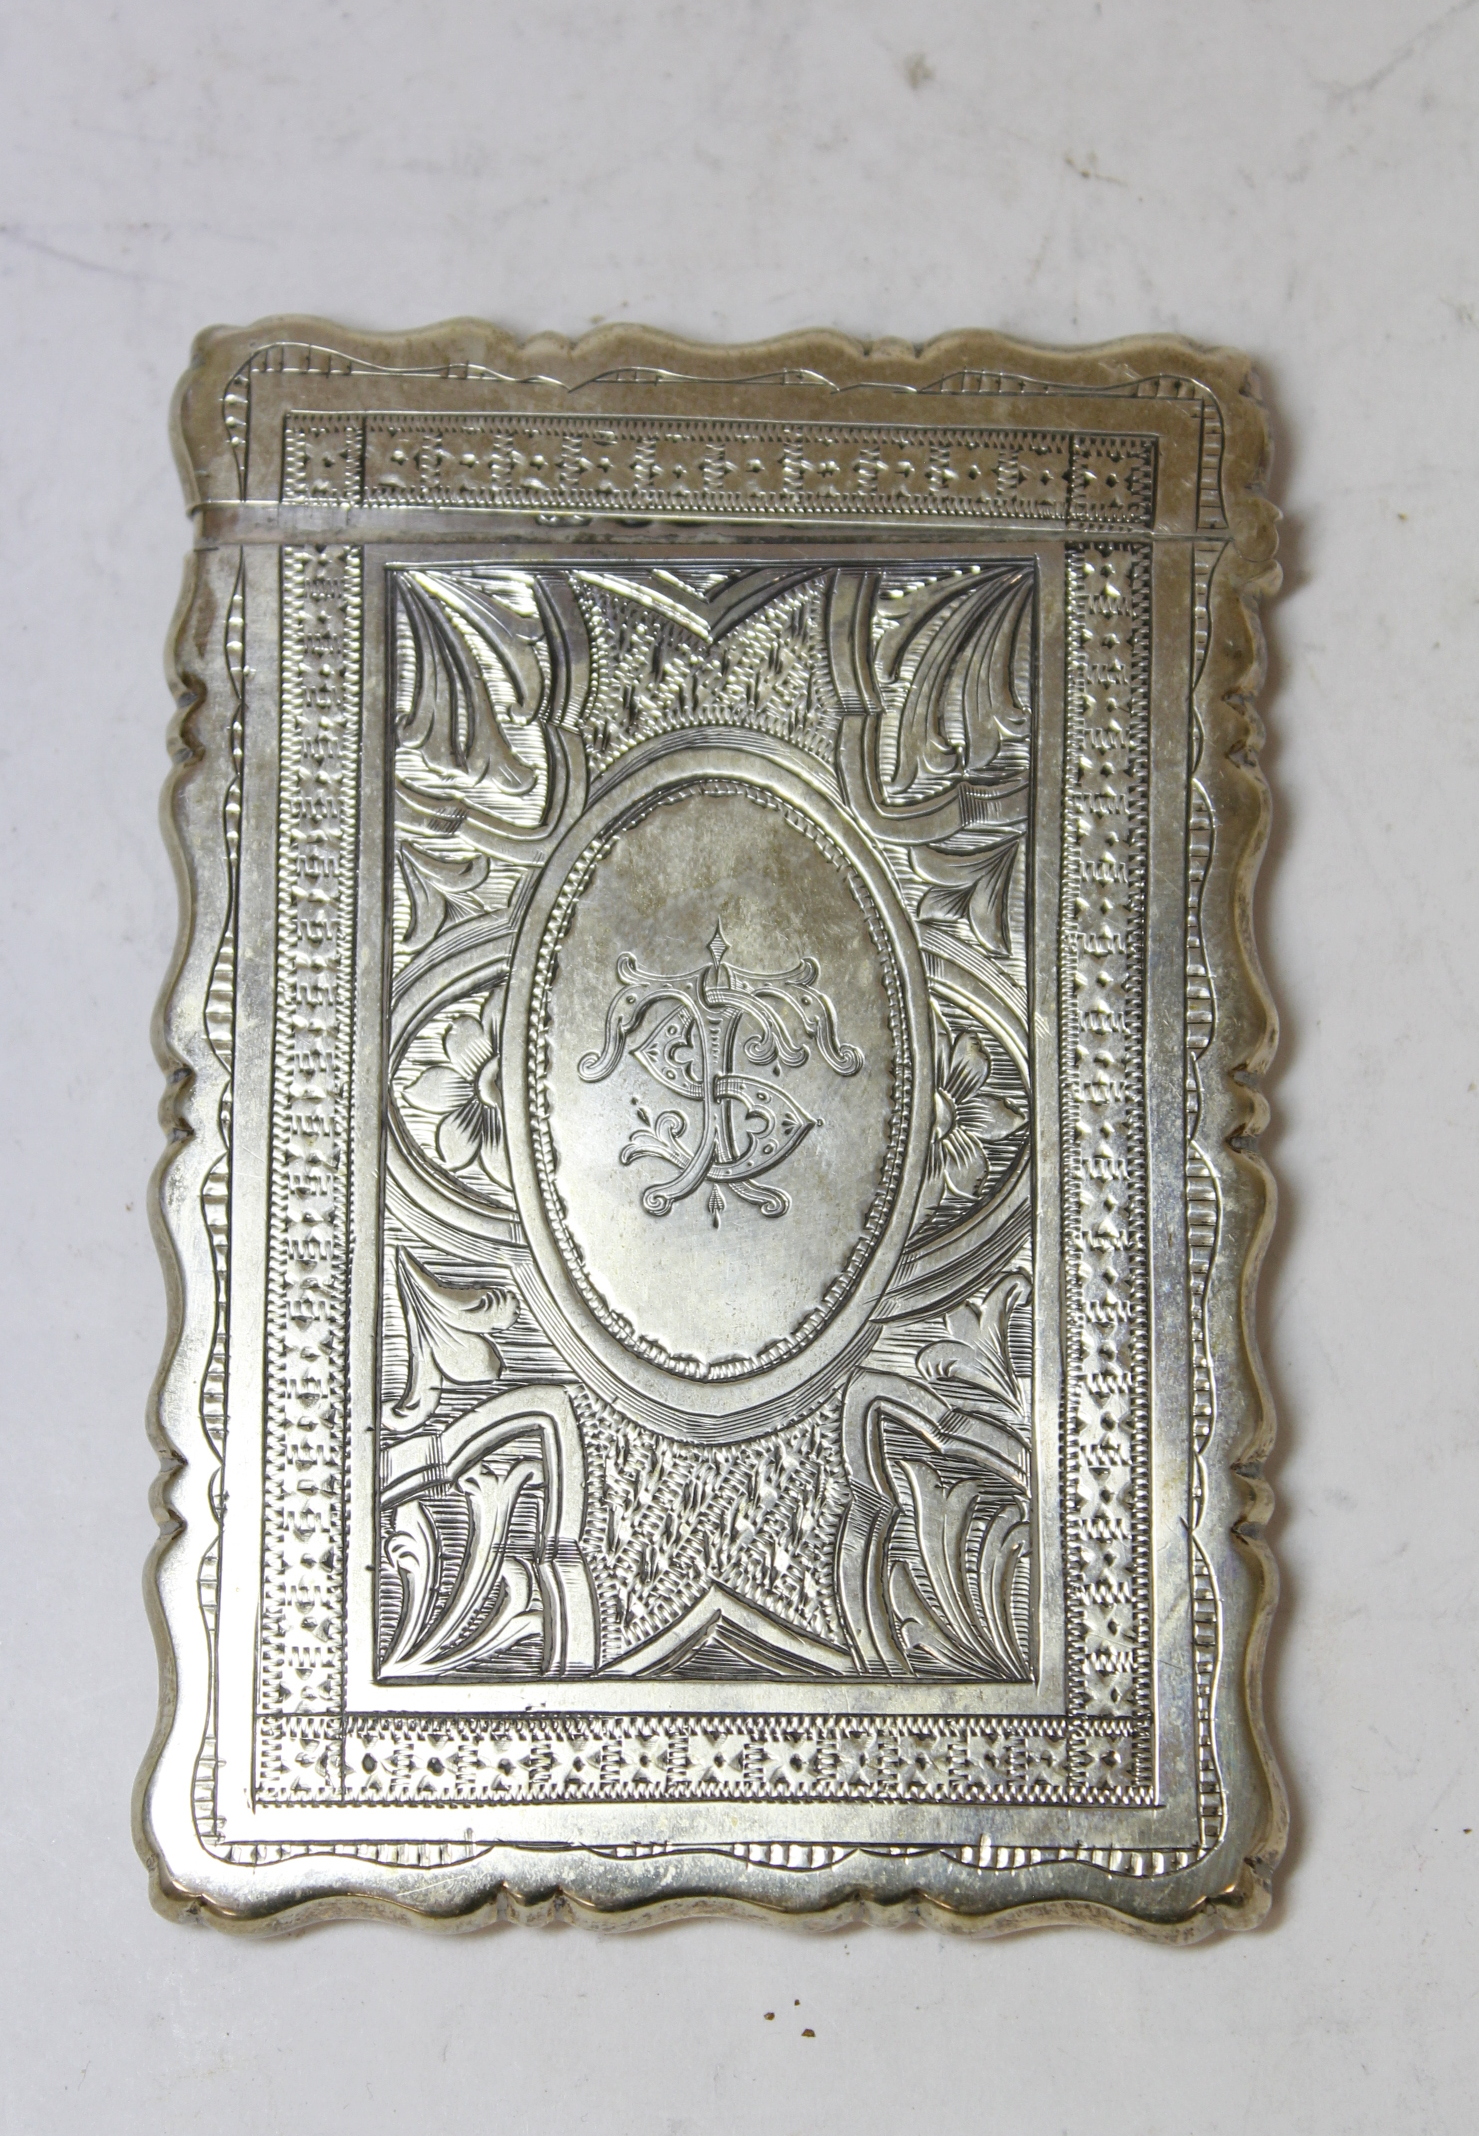 Silver engraved card case monogrammed and dated 1873 by George Unite, Birmingham 1873, 88g. - Image 2 of 5